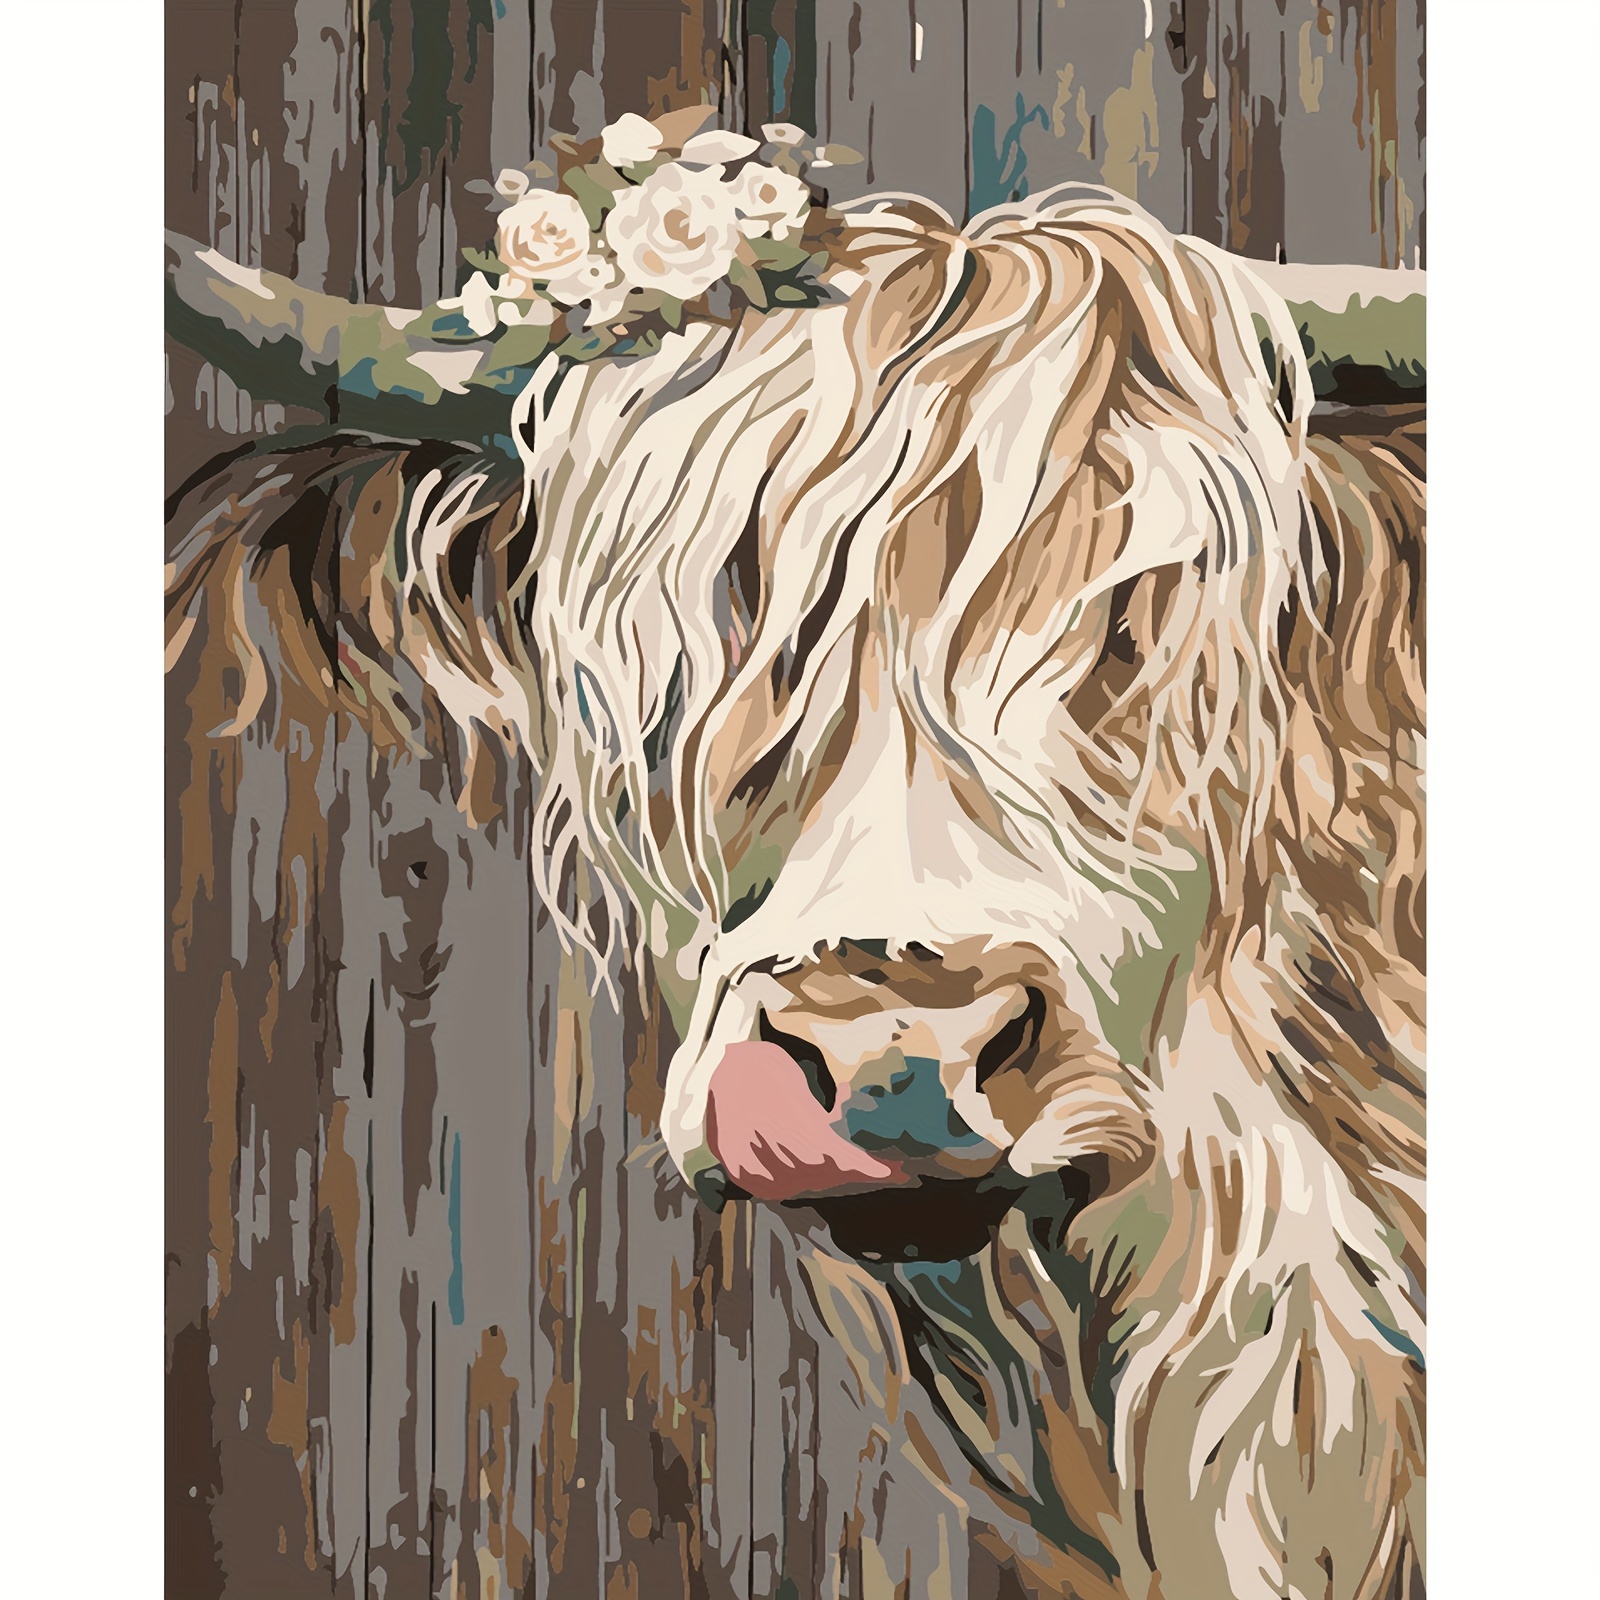 Paint By Numbers Kit DIY Oil Painting Framed Canvas Art Dog Cow